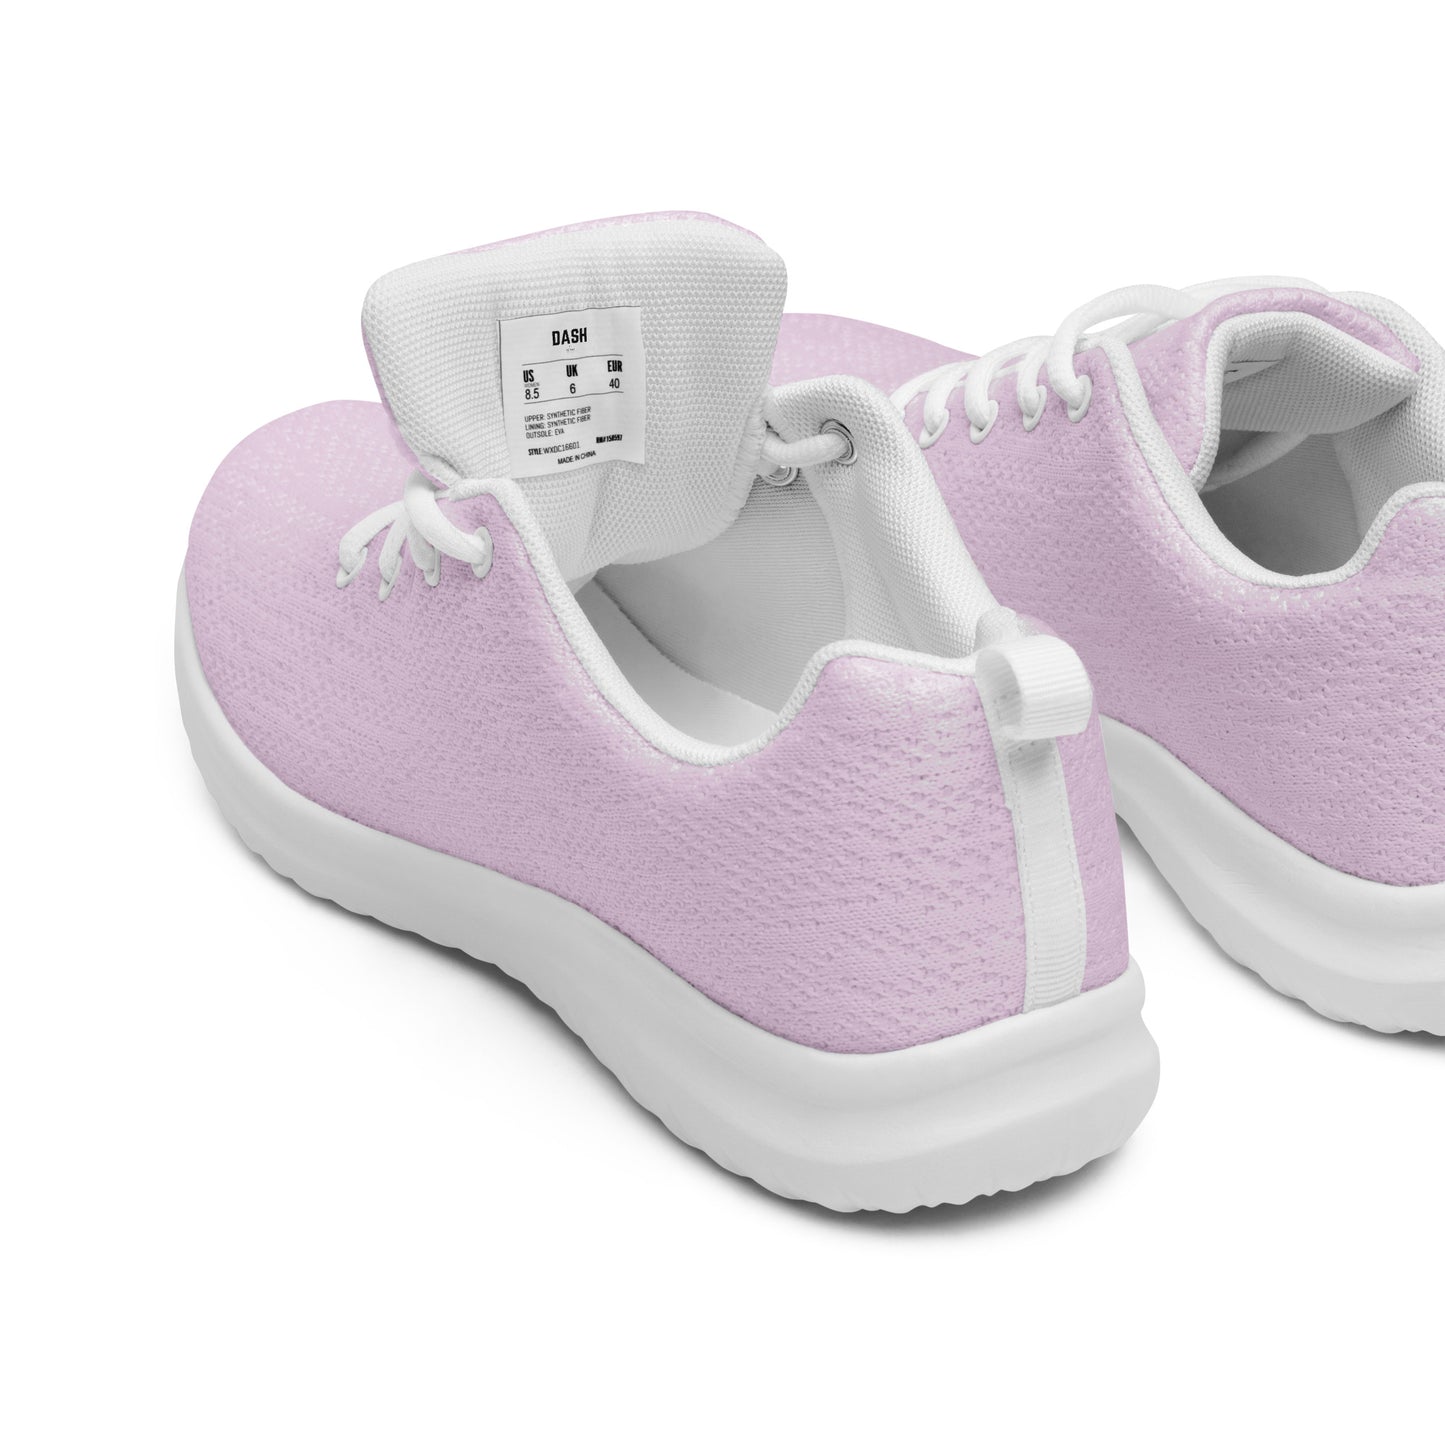 DASH Baby Pink Women’s Athletic Shoes Lightweight Breathable Design by IOBI Original Apparel